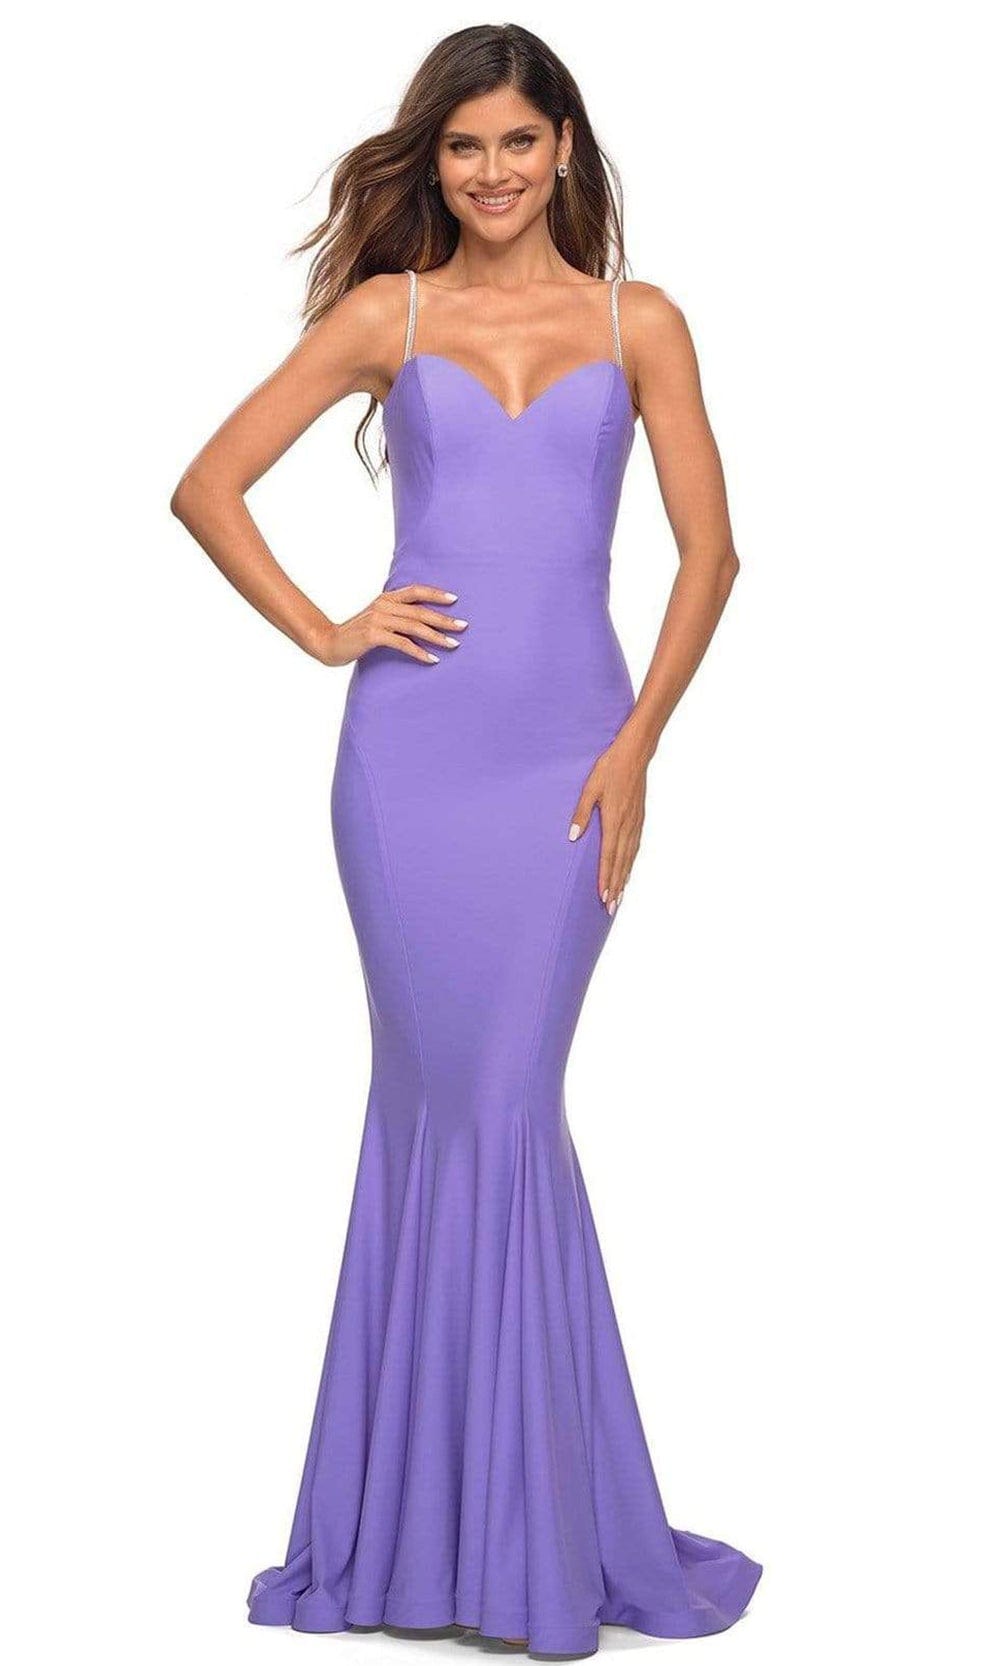 La Femme - 30782 Sweetheart Fitted Trumpet Gown
